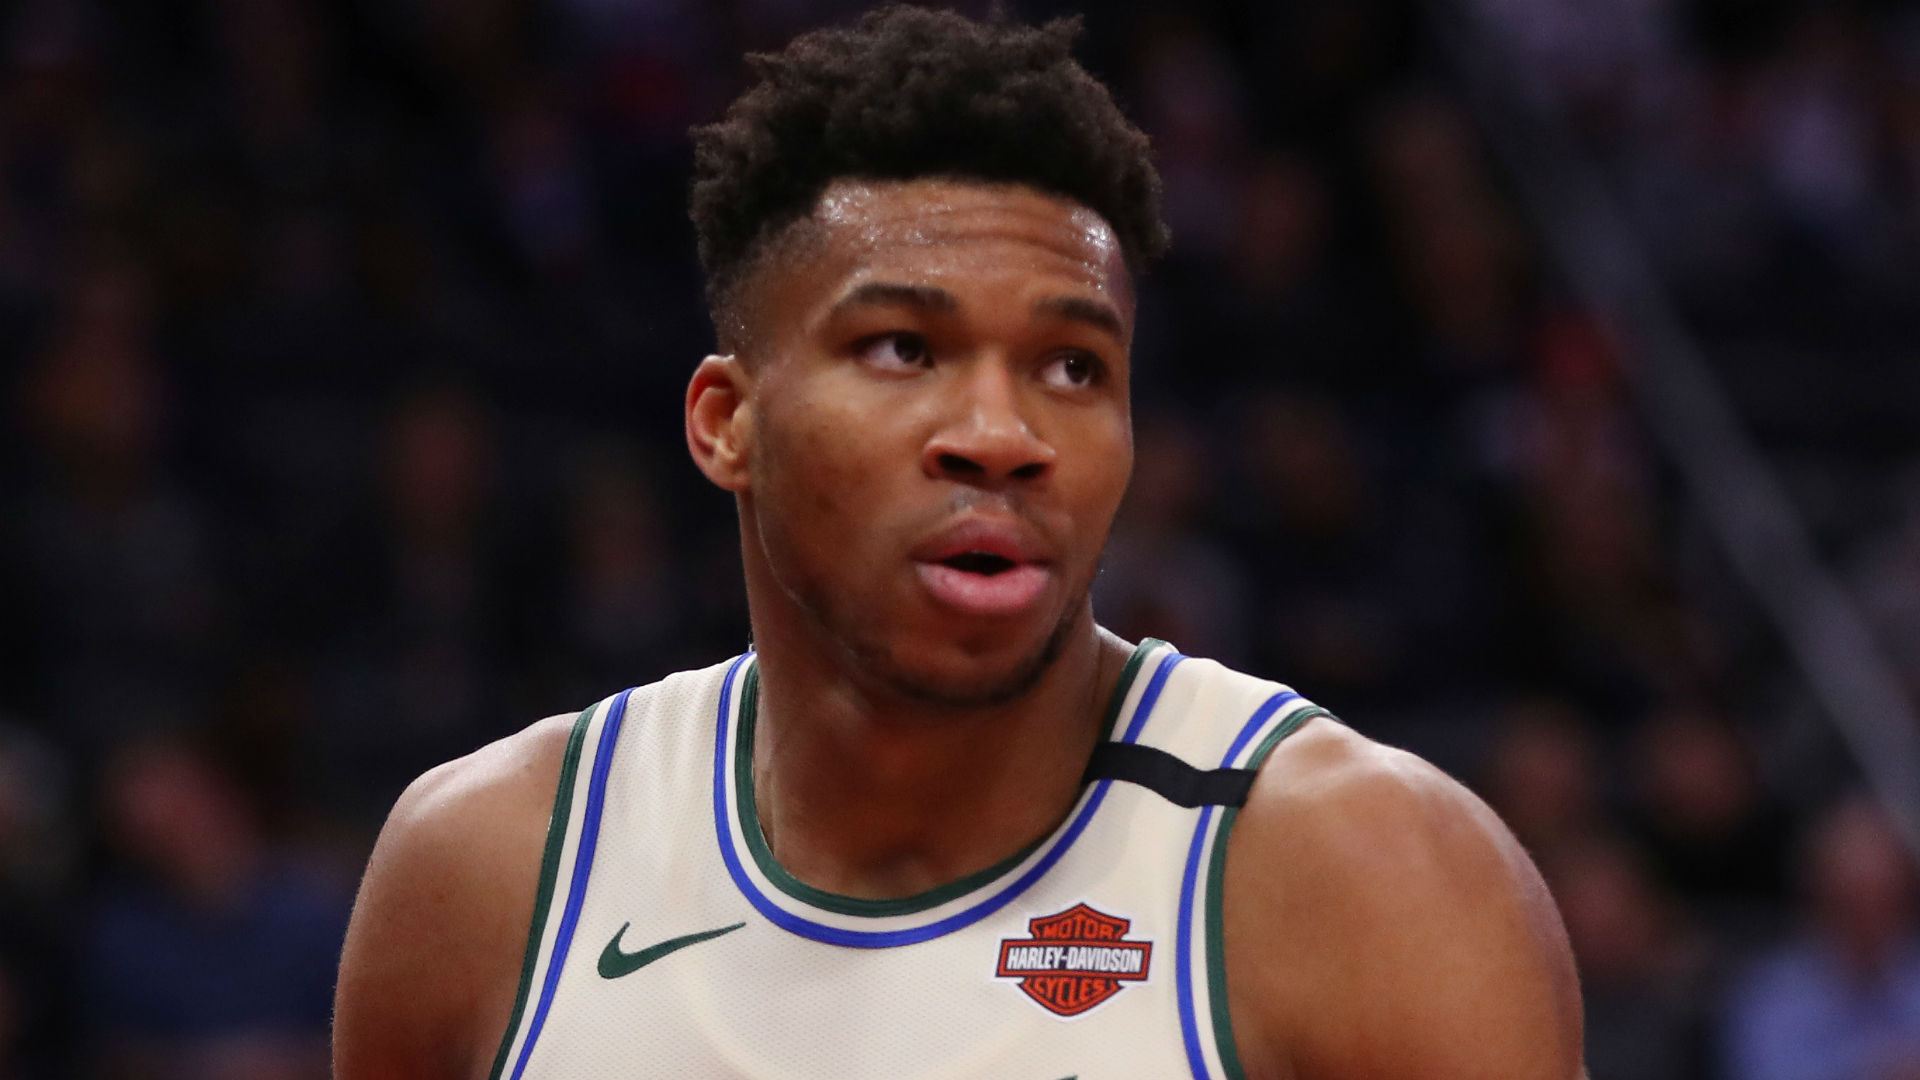 NBA players taking part at Walt Disney World will be part of history and should embrace the moment, says Giannis Antetokounmpo.